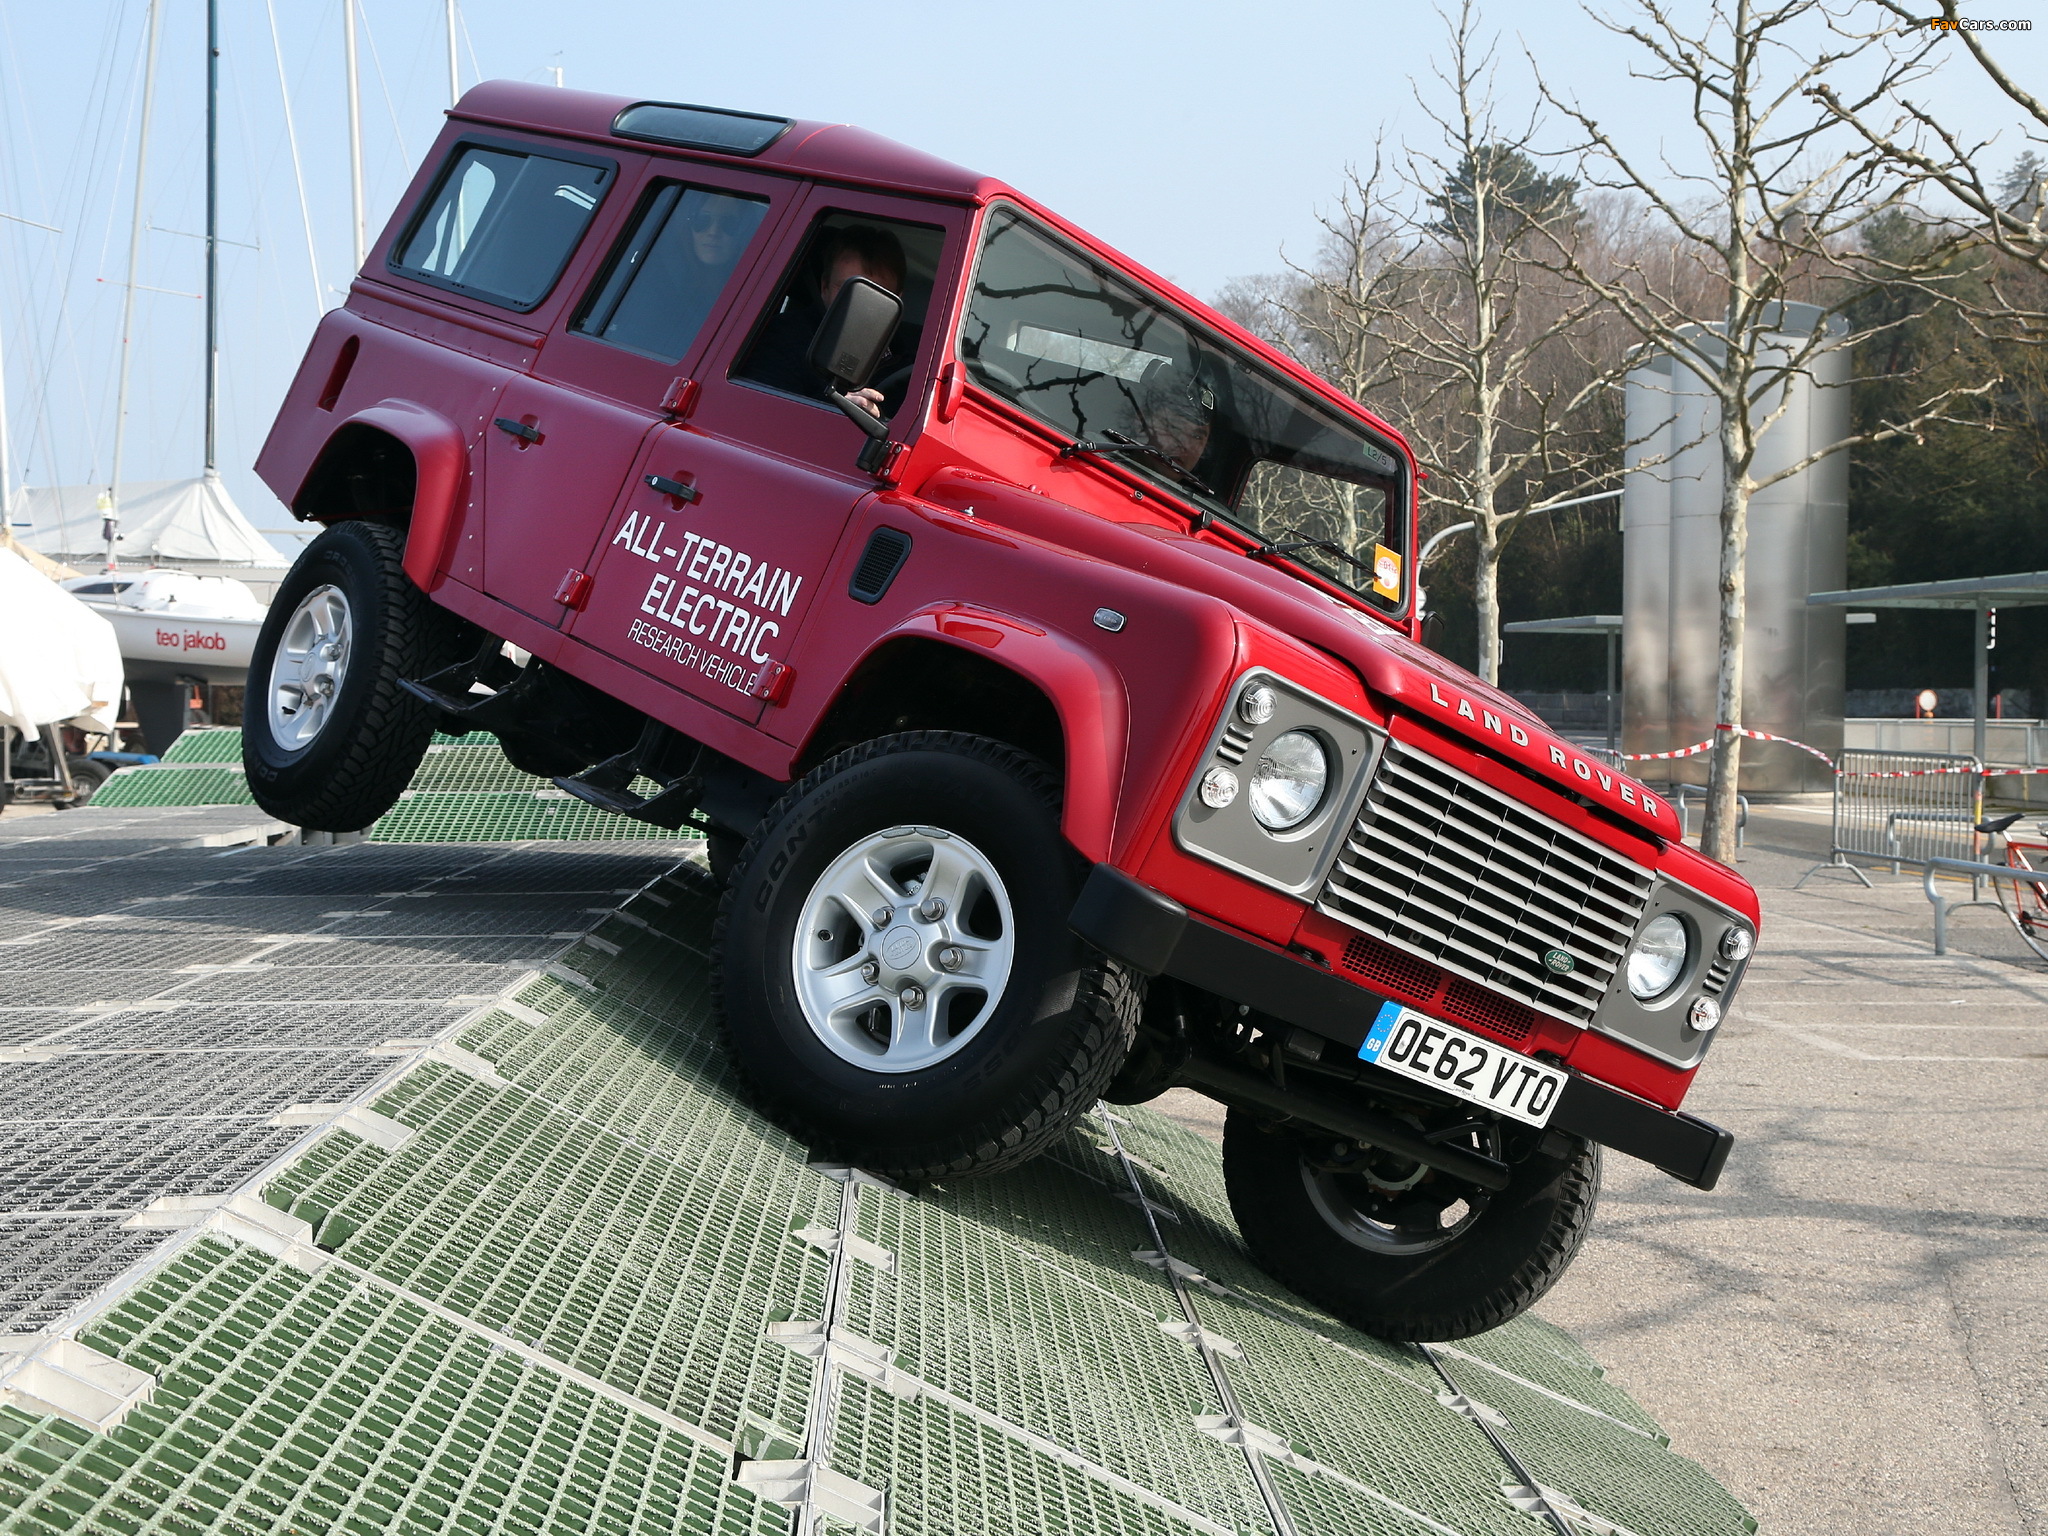 Land Rover Electric Defender Research Vehicle 2013 pictures (2048 x 1536)